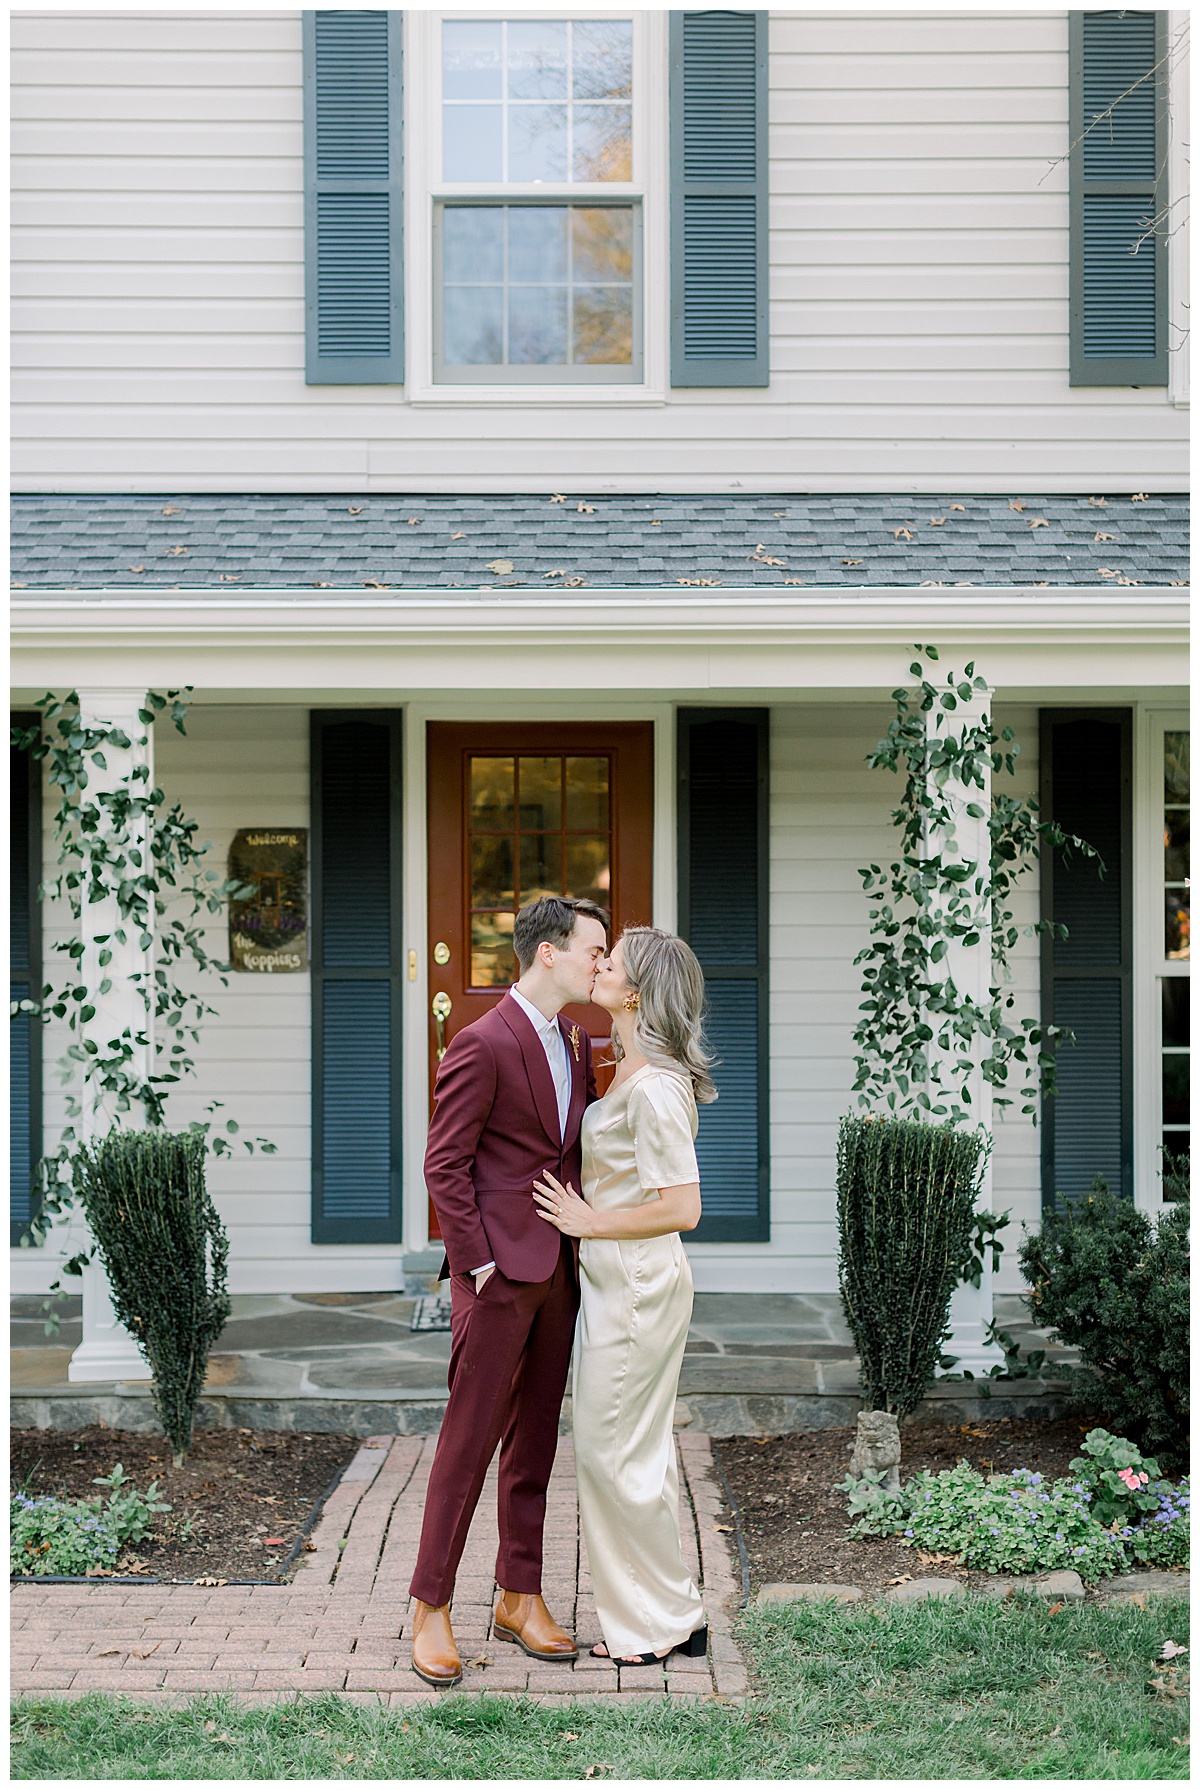 Margot and Johnny - A Gorgeous Autumn Micro Wedding | Candice Adelle Photography - Virginia Elopement Photographer_0071.jpg